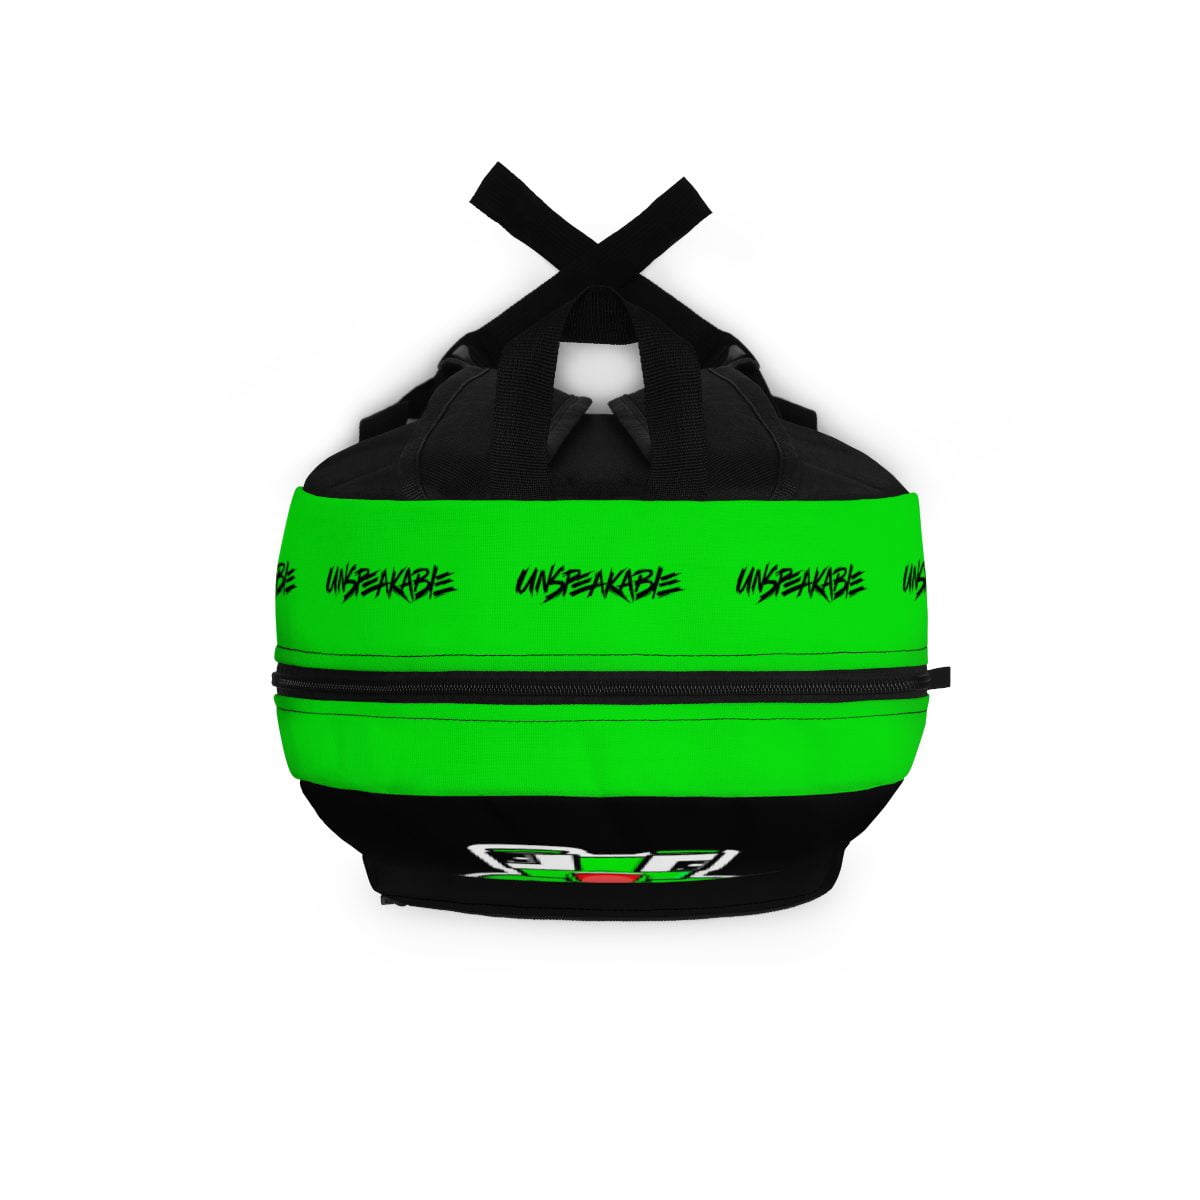 Unspeakable Gaming YouTube Channel Backpack in Black and Neon Green Cool Kiddo 21